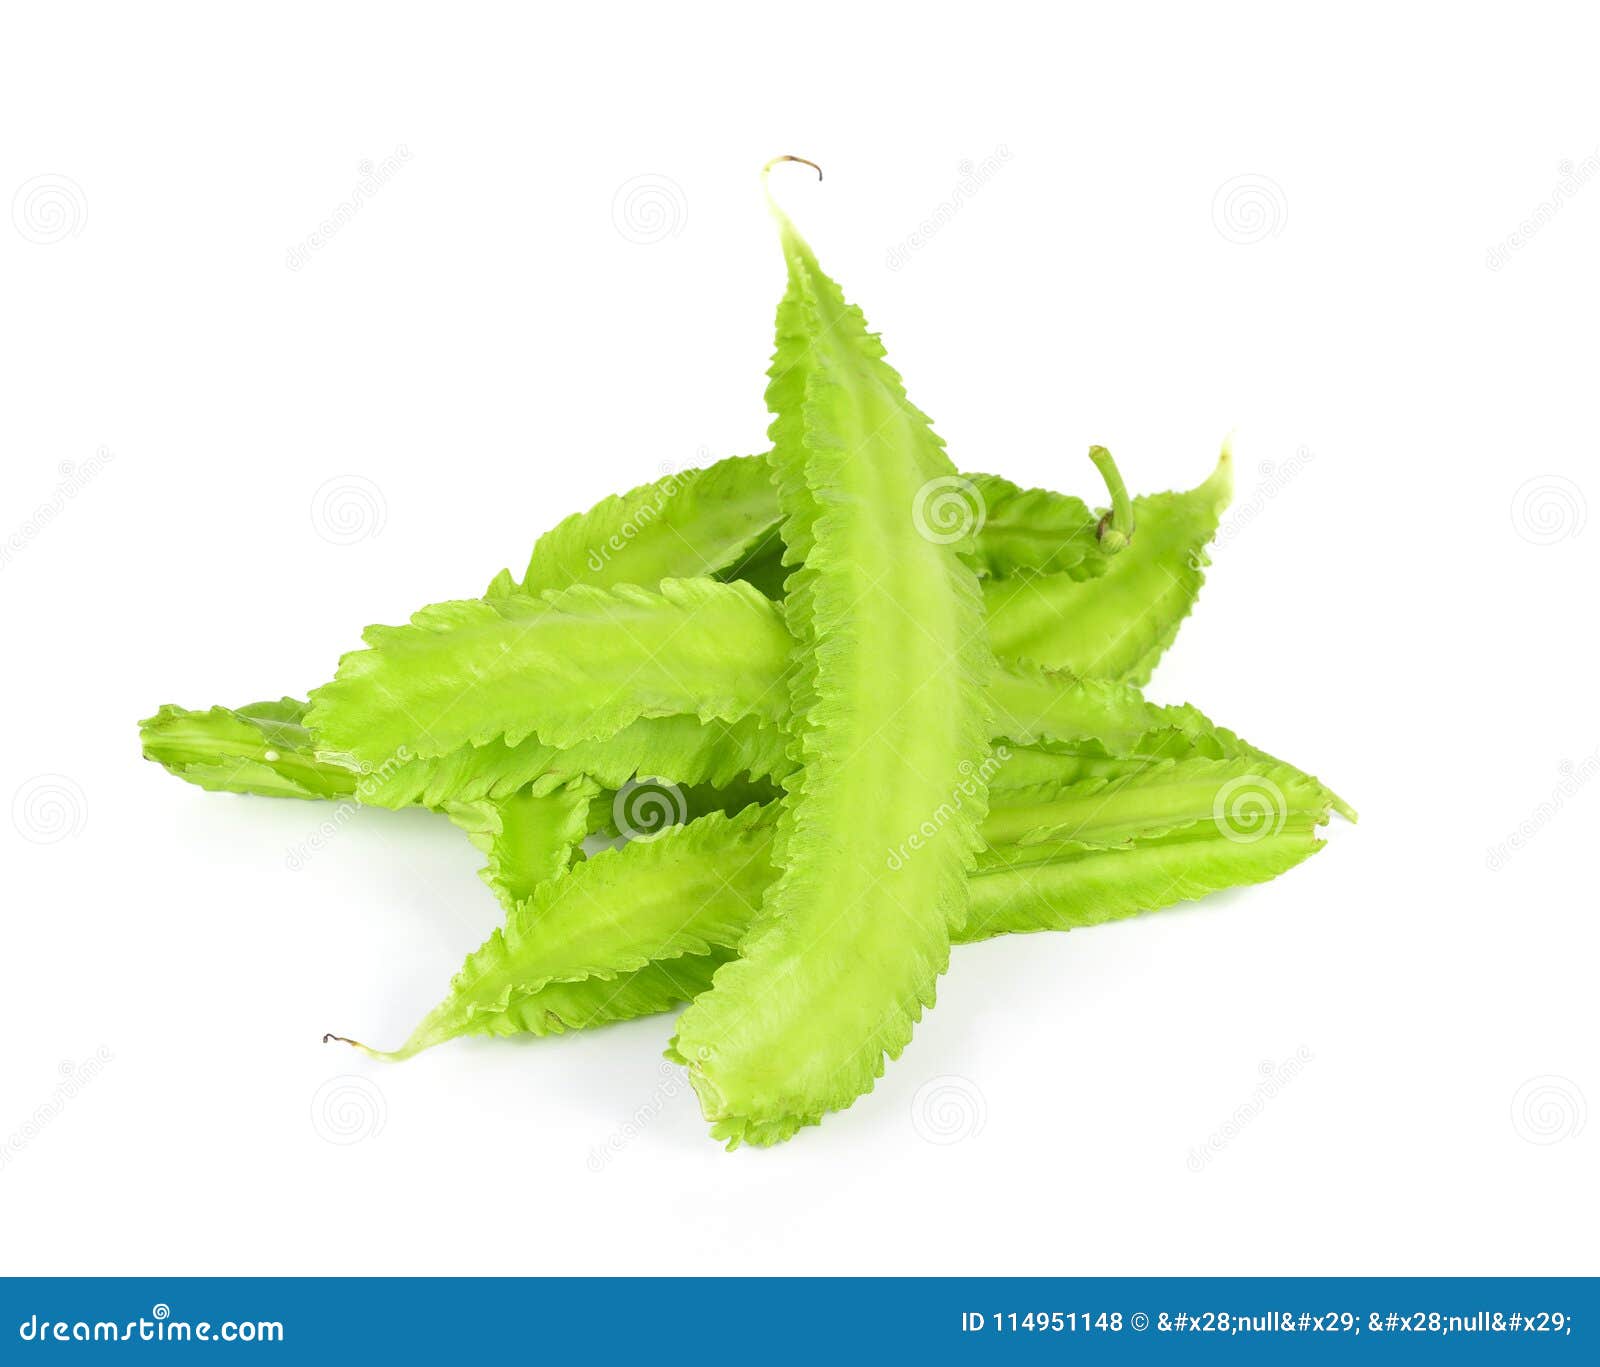 winged bean on white background.